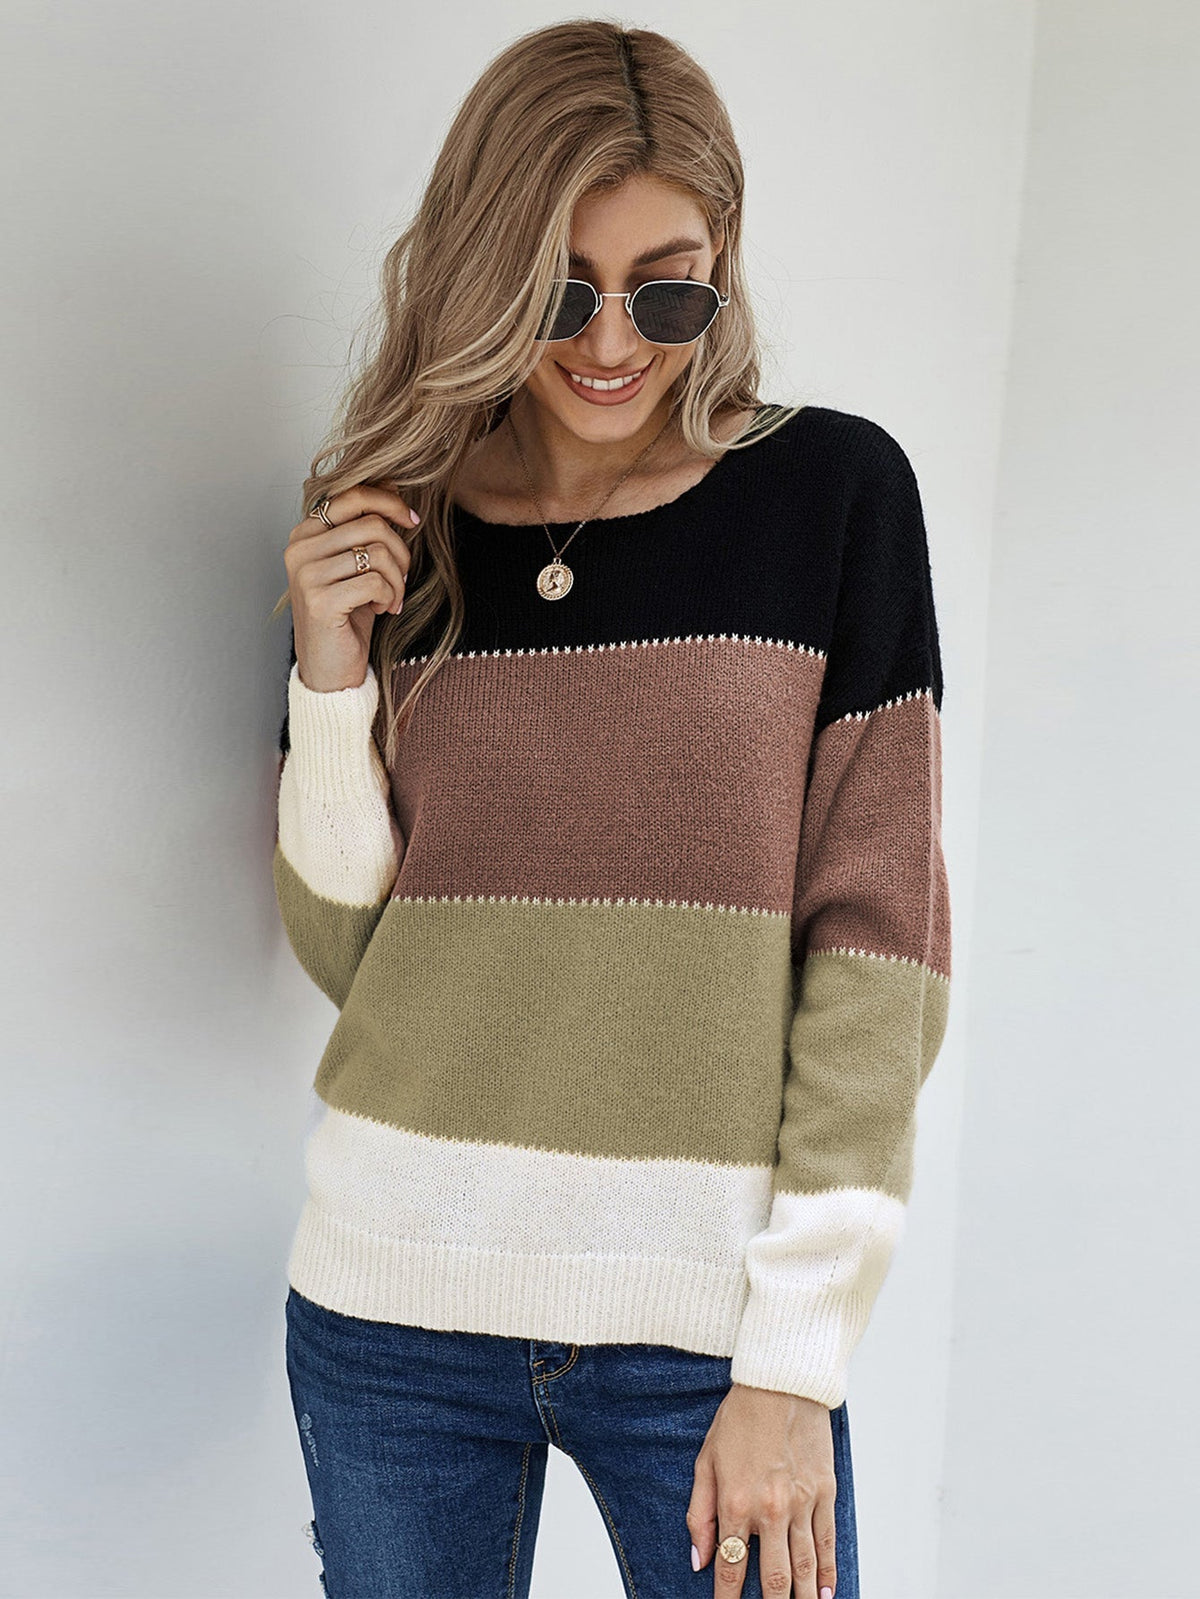 Women's Casual Loose Long Sleeve Colorblock Crewneck Knitted Tops Chunky Sweater Sai Feel